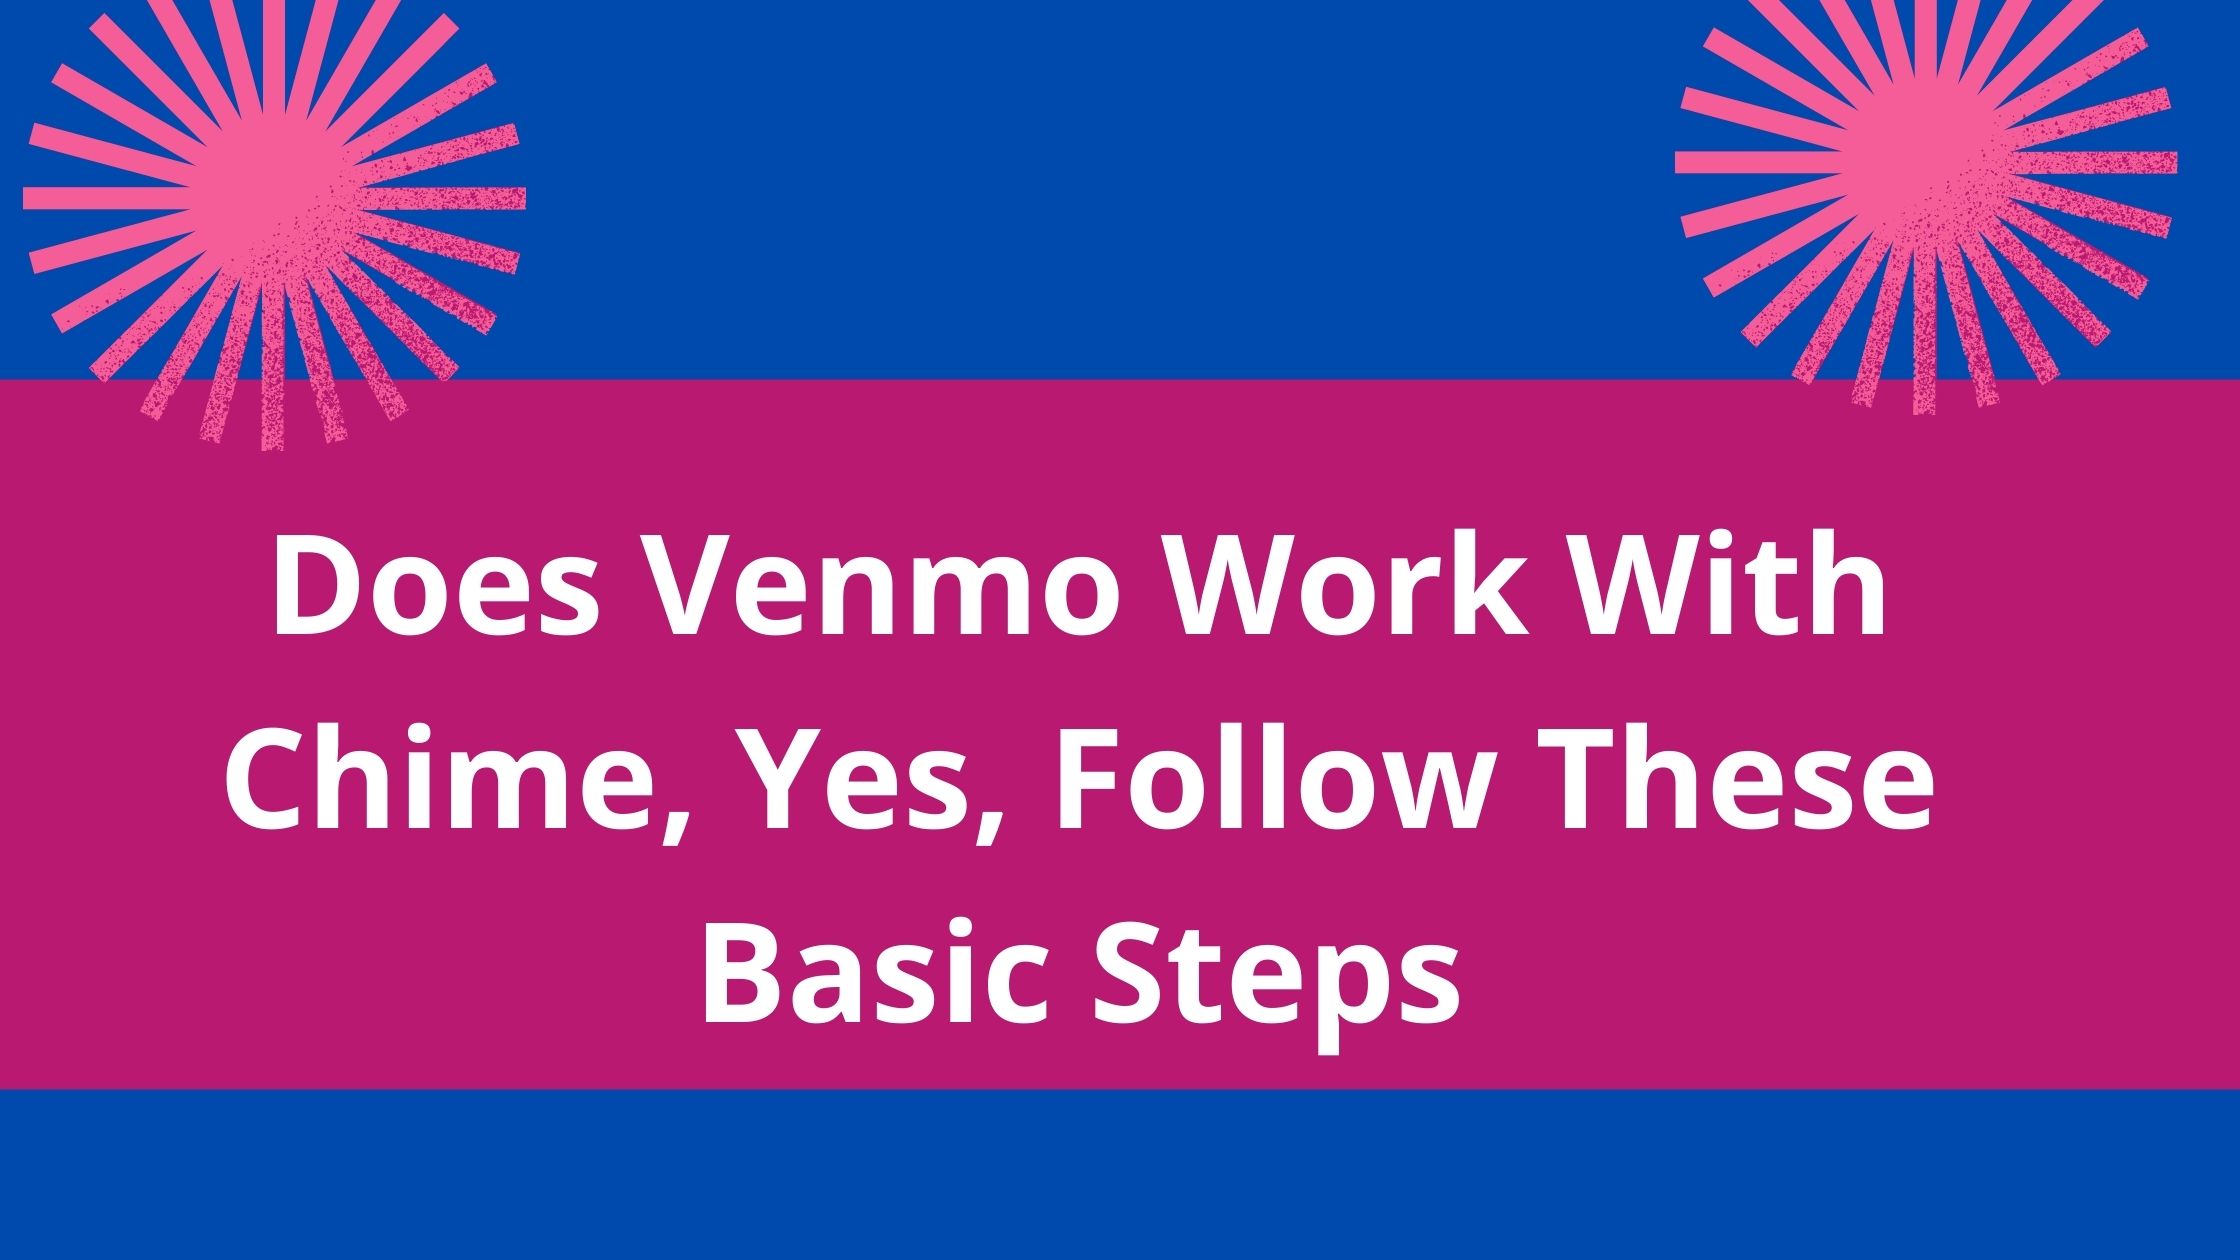 Does Venmo Work With Chime, 2022, Yes, Follow These Basic Steps